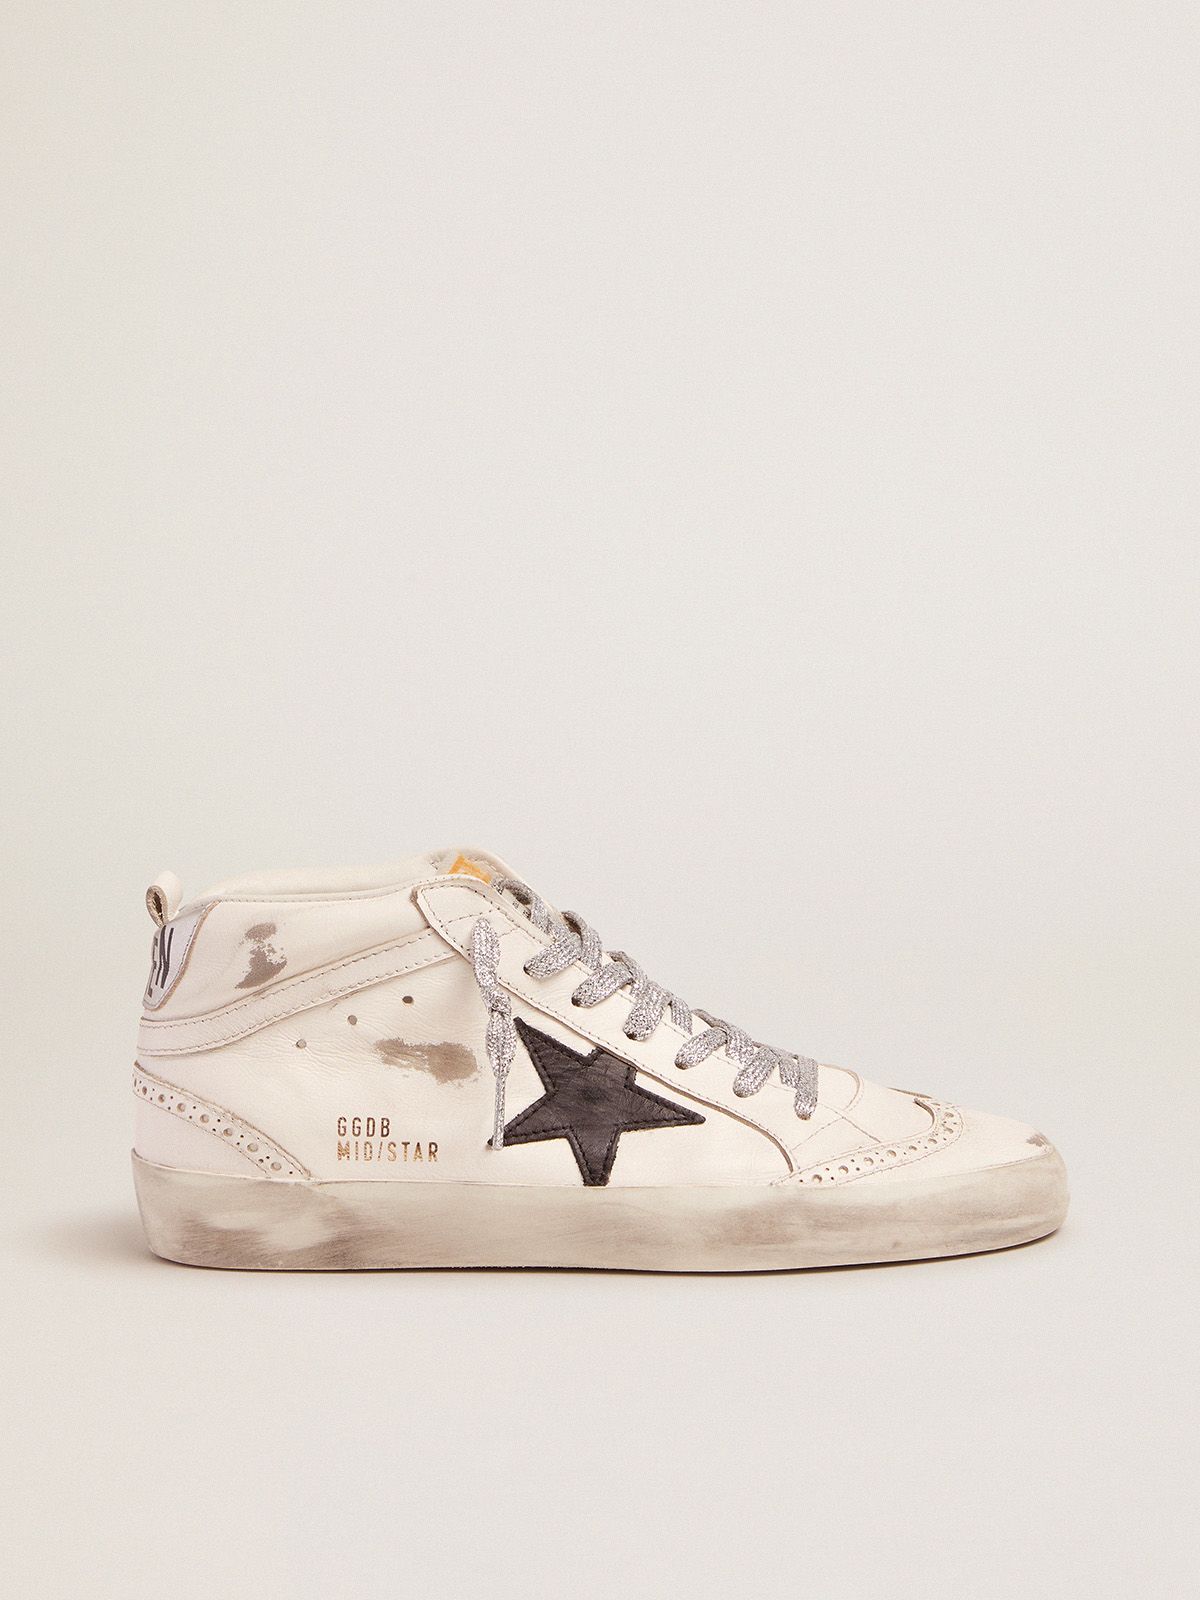 golden goose Mid-Star sneakers laces tab with and heel laminated glittery